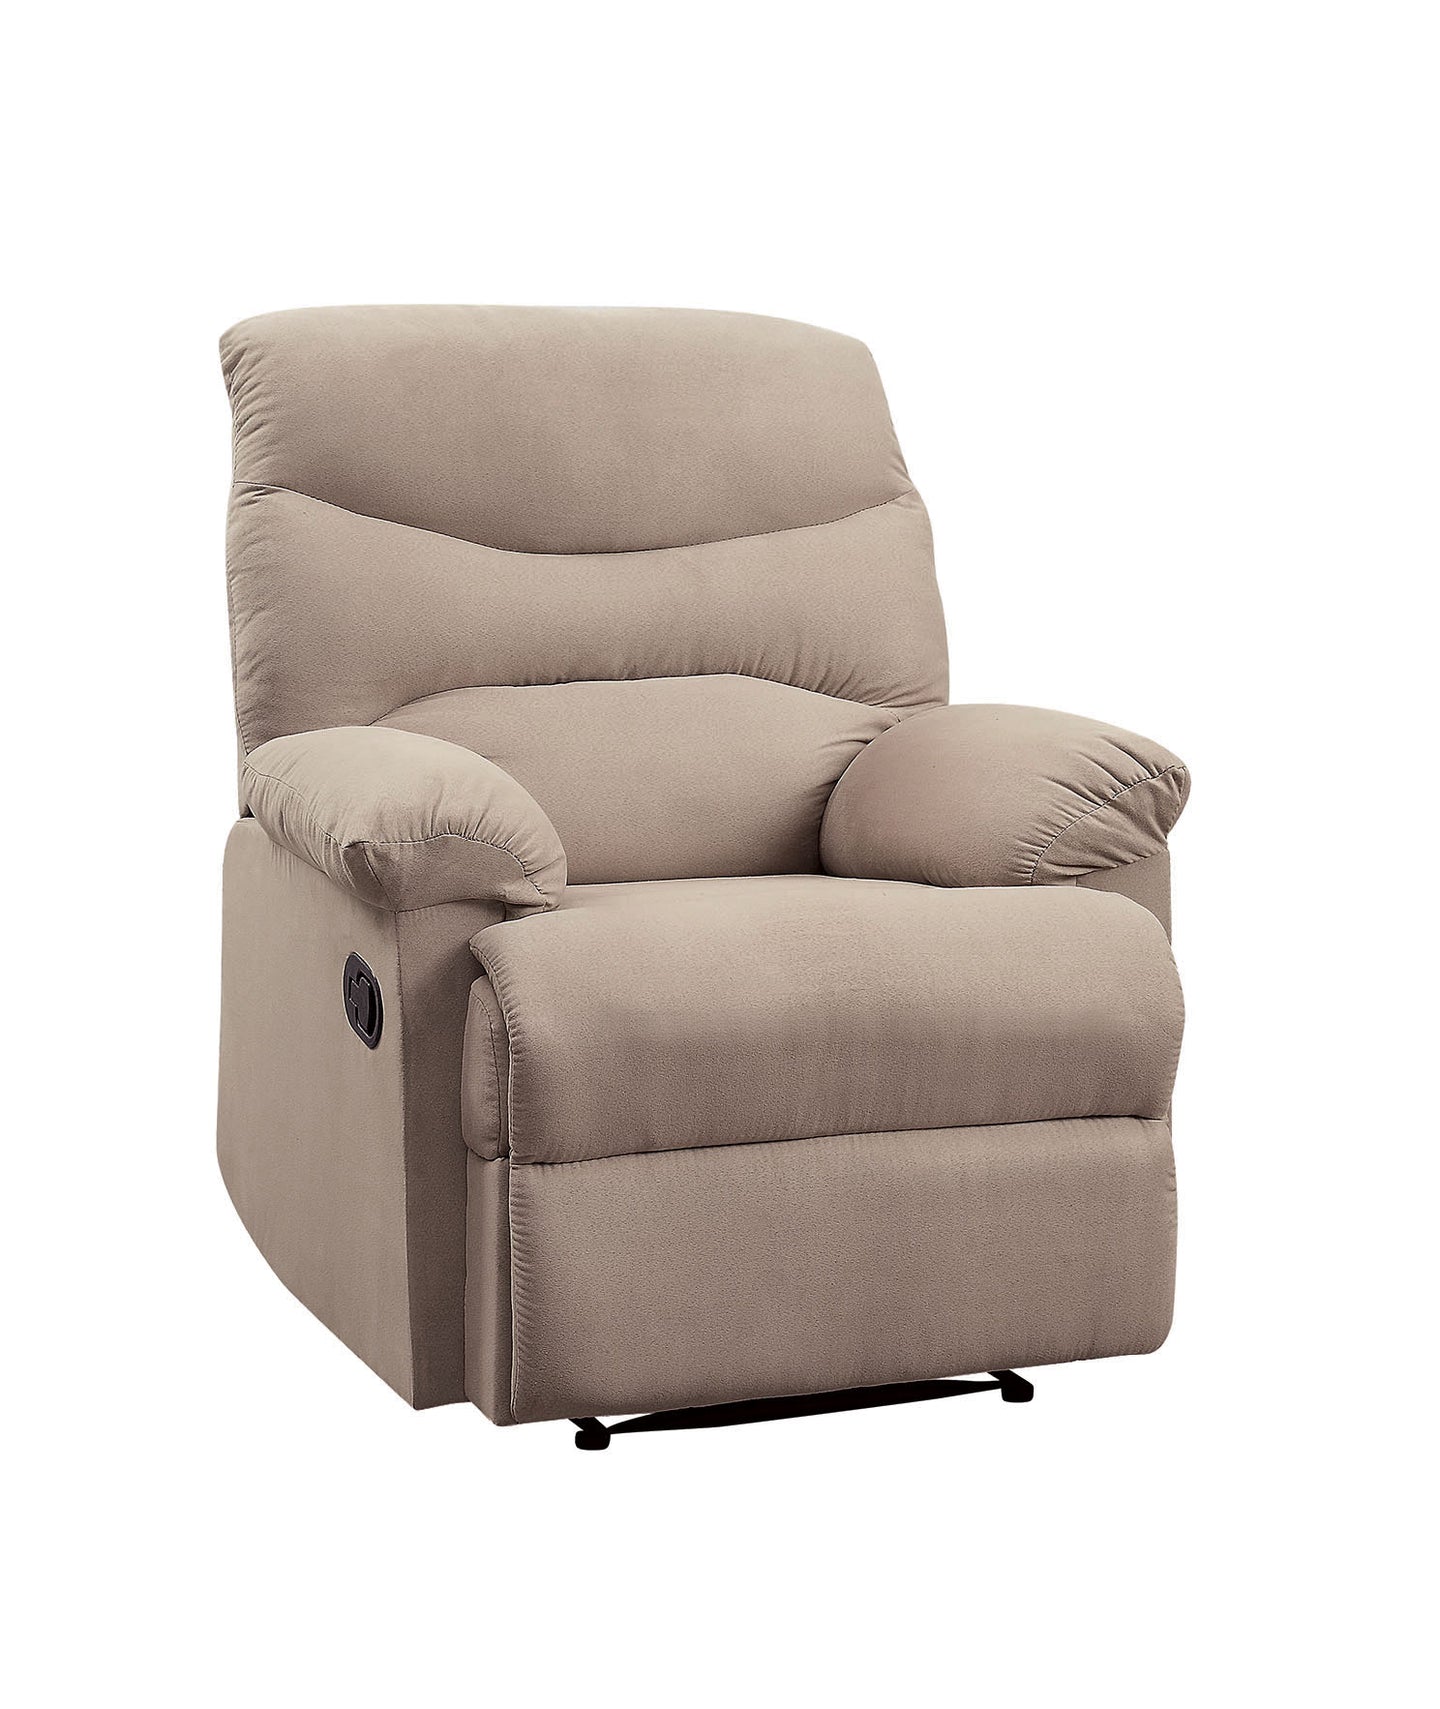 Arcadia Beige Woven Fabric Recliner (Motion)